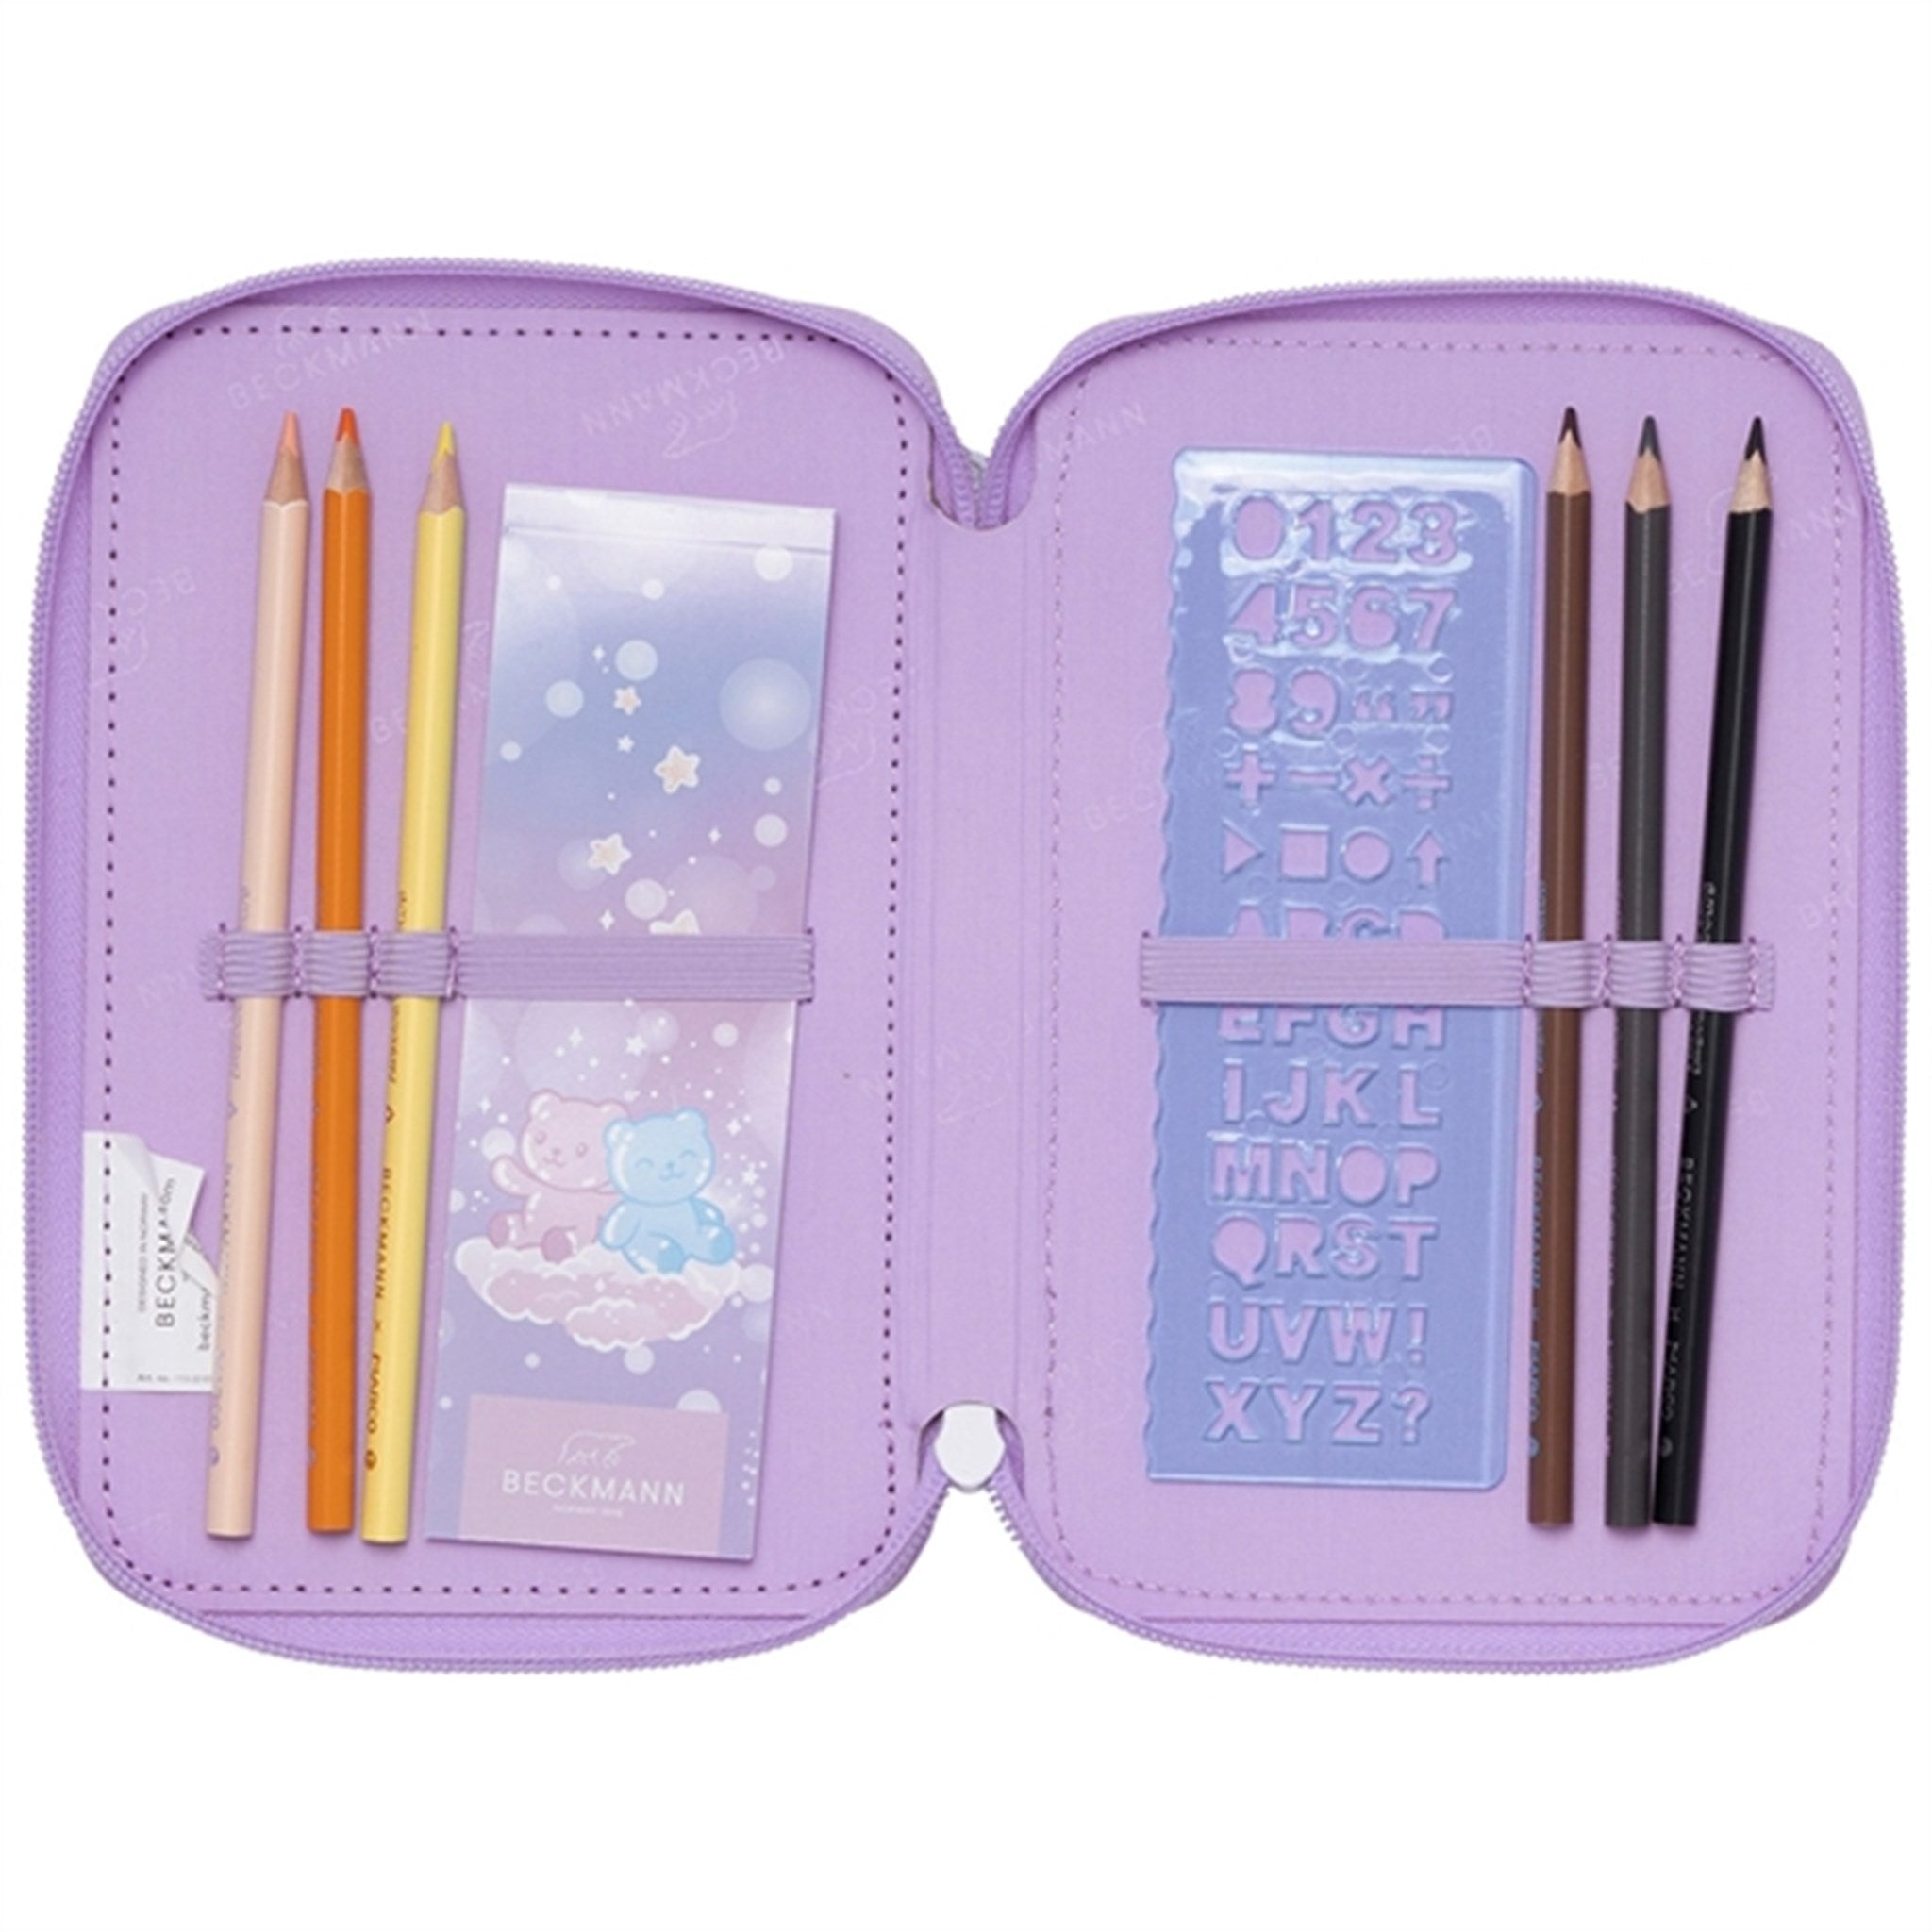 Beckmann Three Section Pencil Case Candy 4